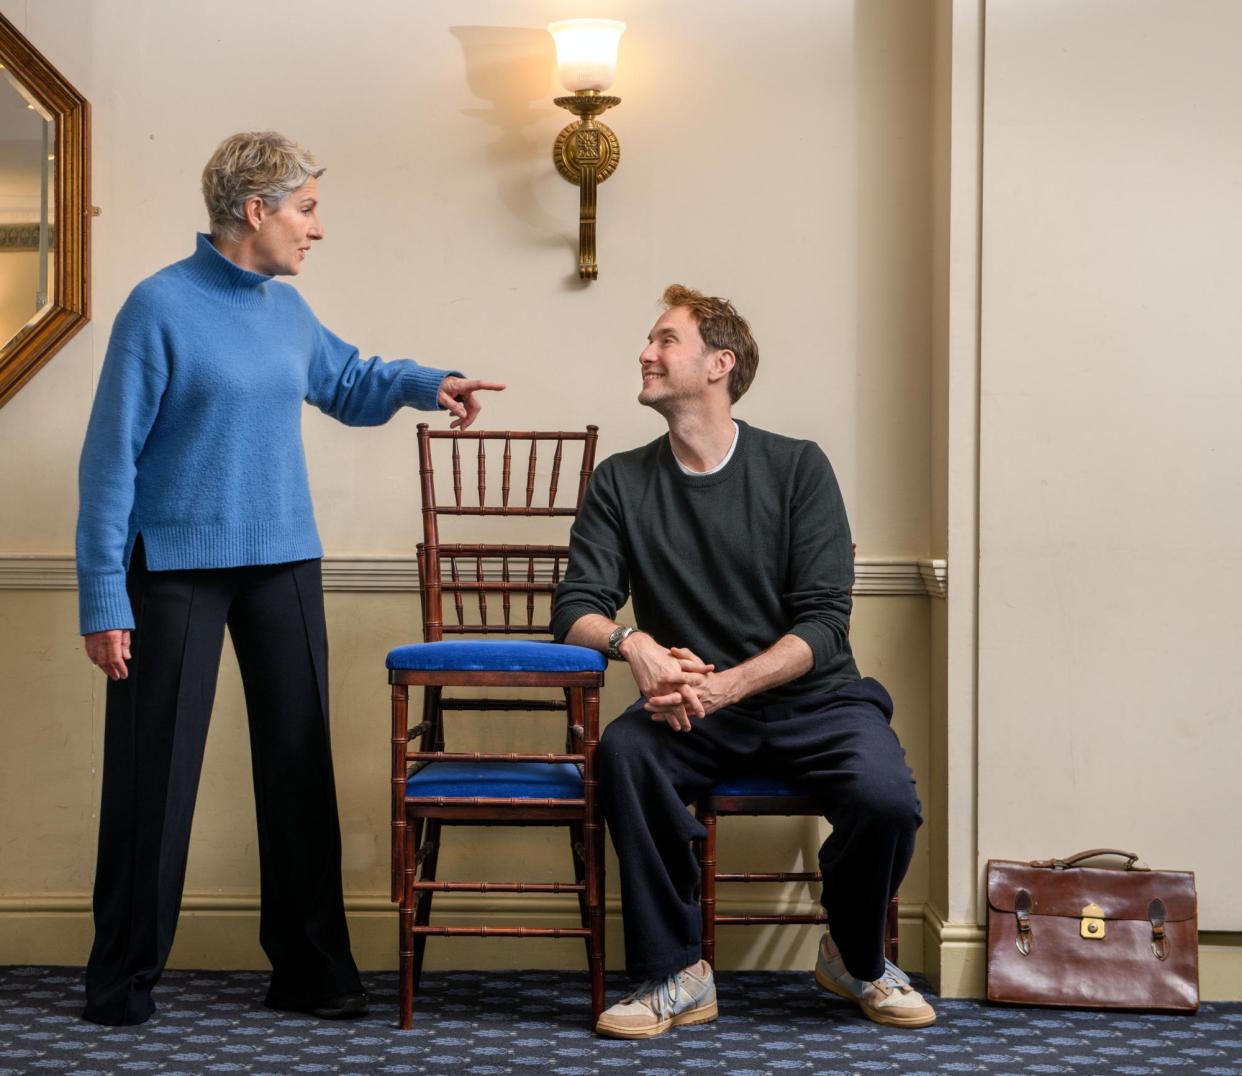 <span>‘I’m not going to get any laughs in this’ … Greig and Chris take a break from rehearsals.</span><span>Photograph: Adrian Sherratt/The Guardian</span>